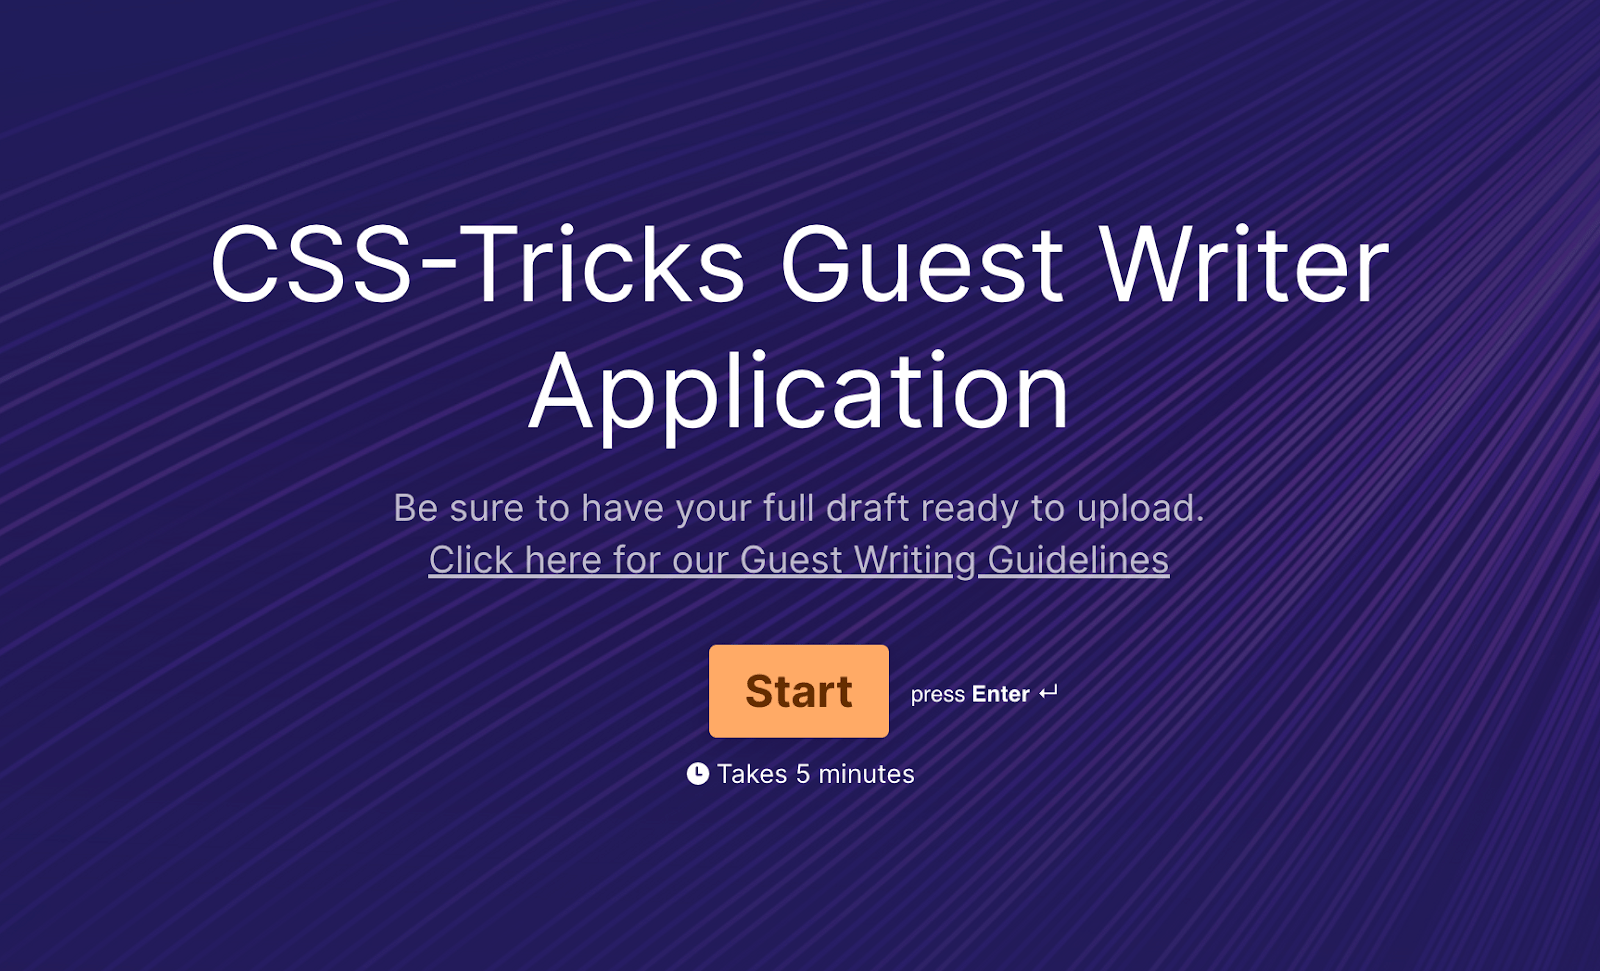 CSS-Tricks guest writer application front page.